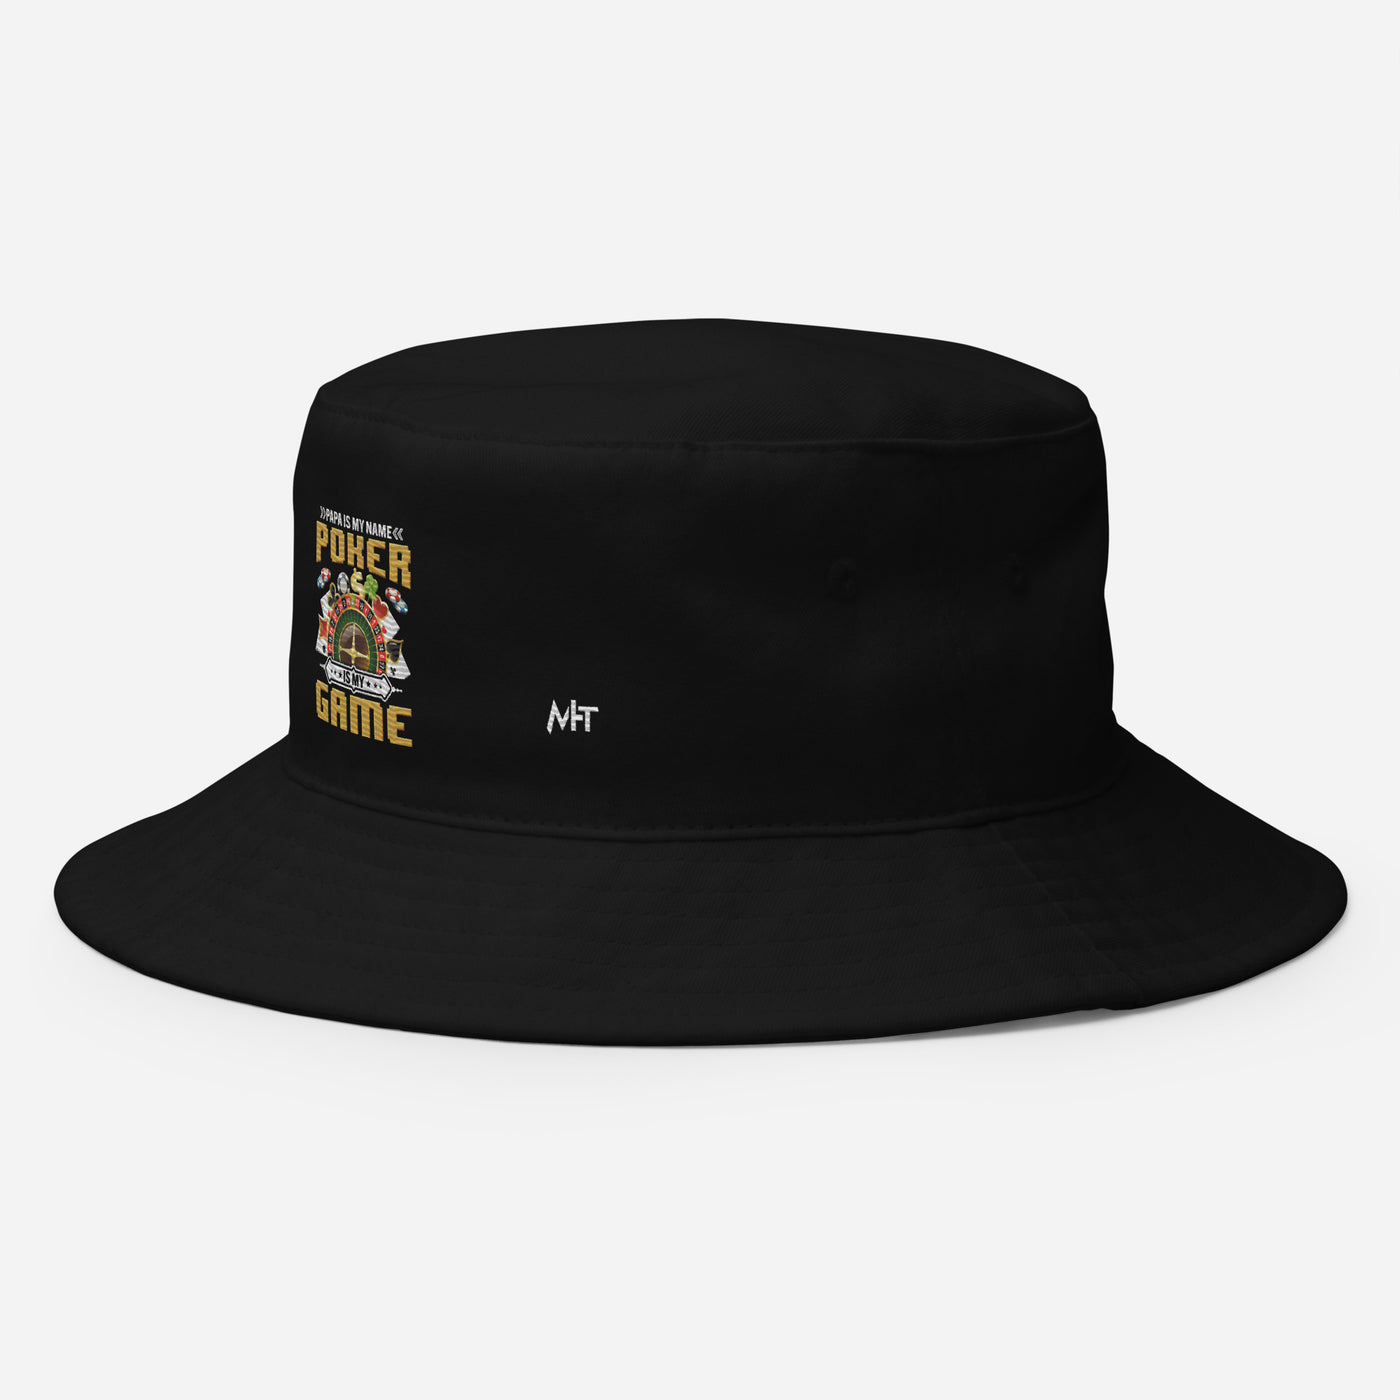 Papa Is my Name; Poker Is my Game - Bucket Hat